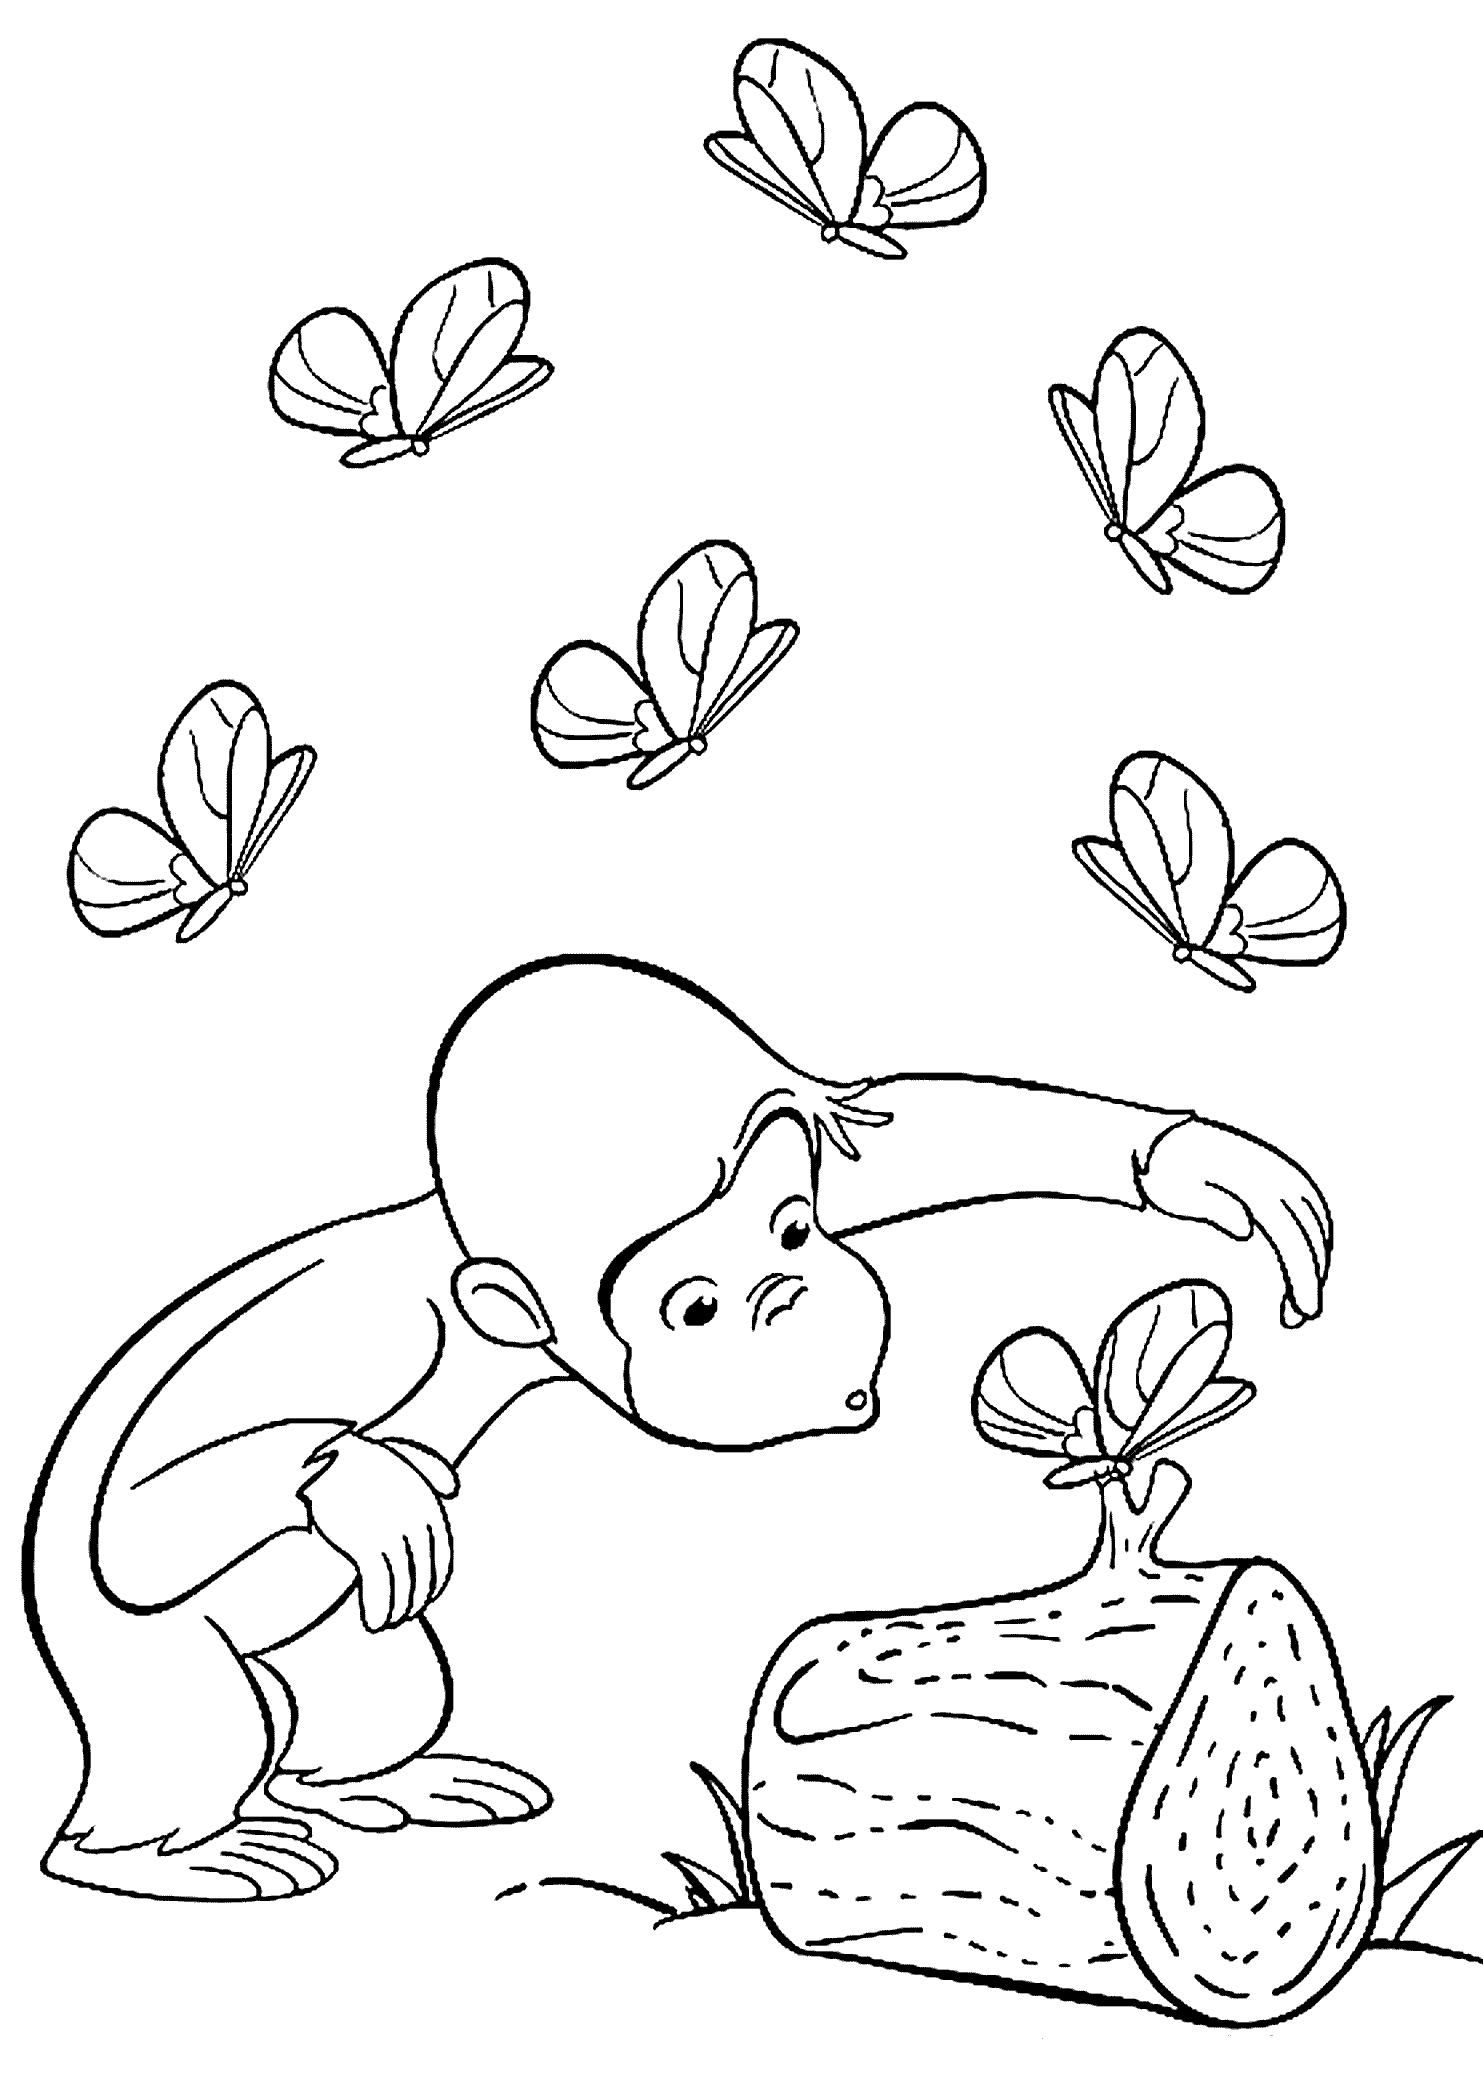 Printable Curious George Coloring Pages | Free Coloring Pages